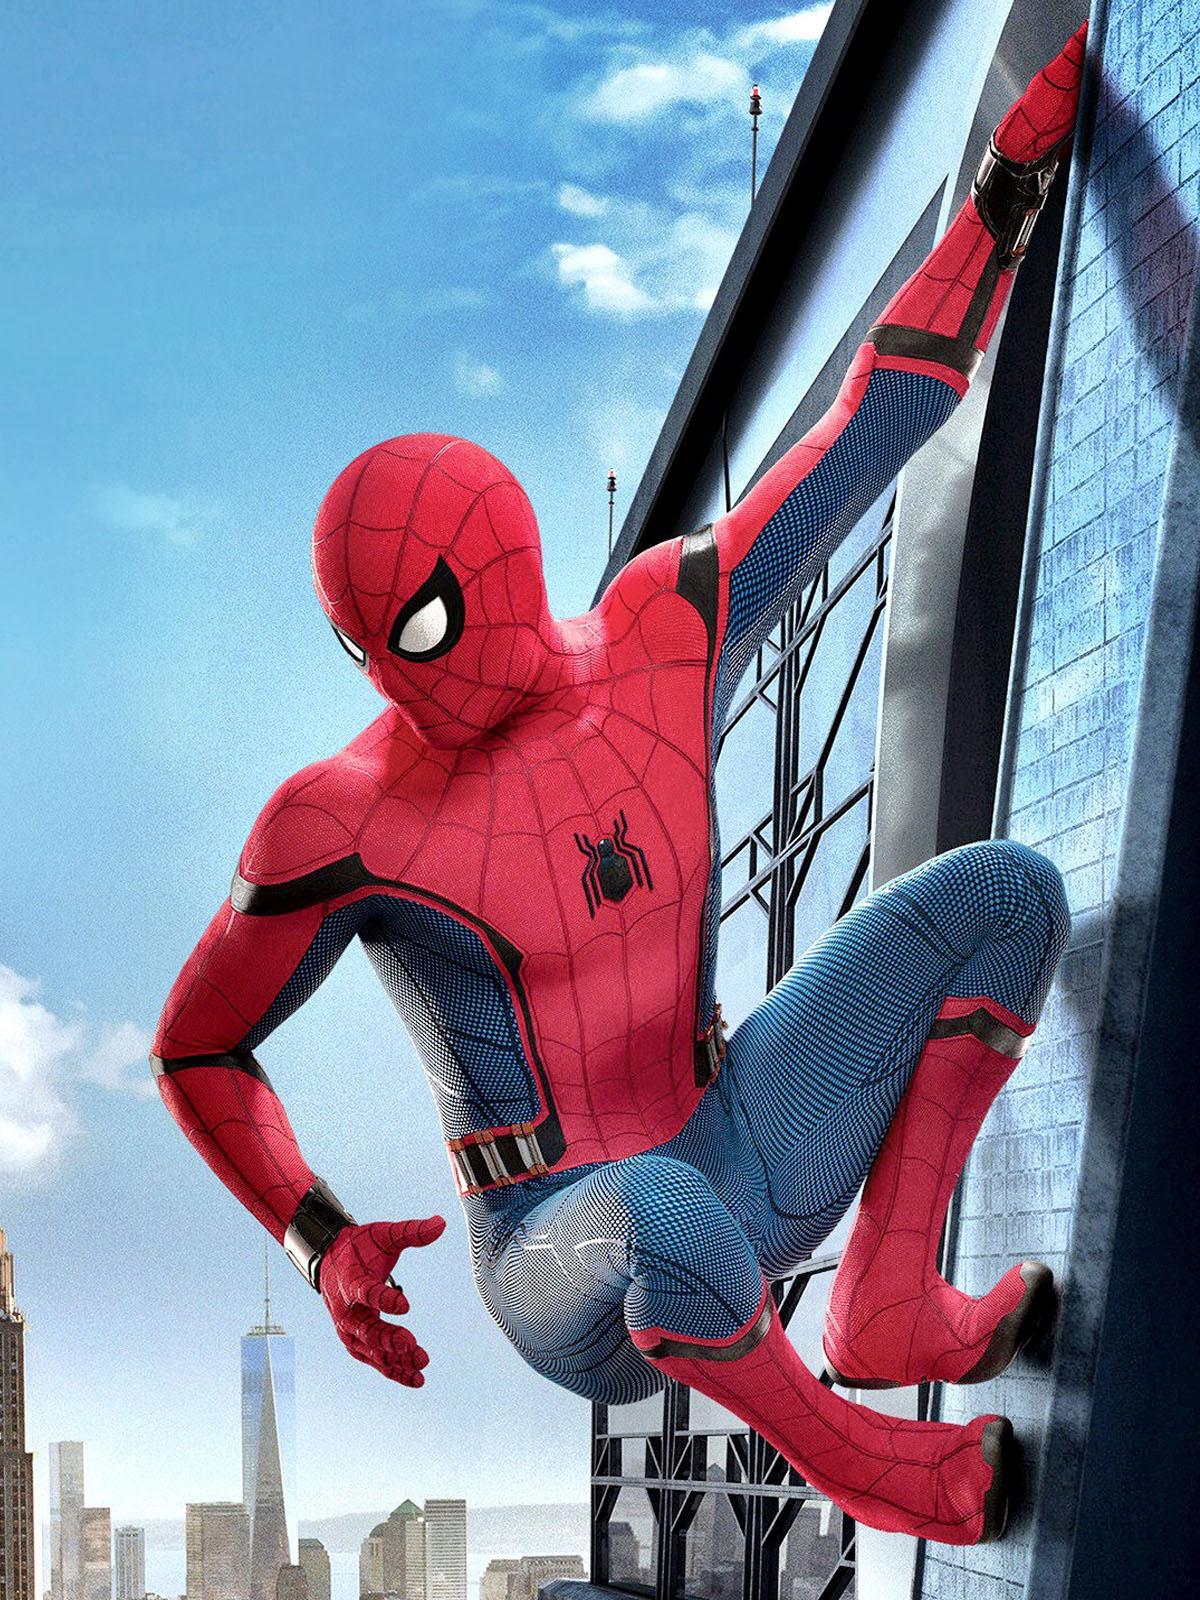 Download Spider Man Homecoming New Poster 2017 Free Pure 4K